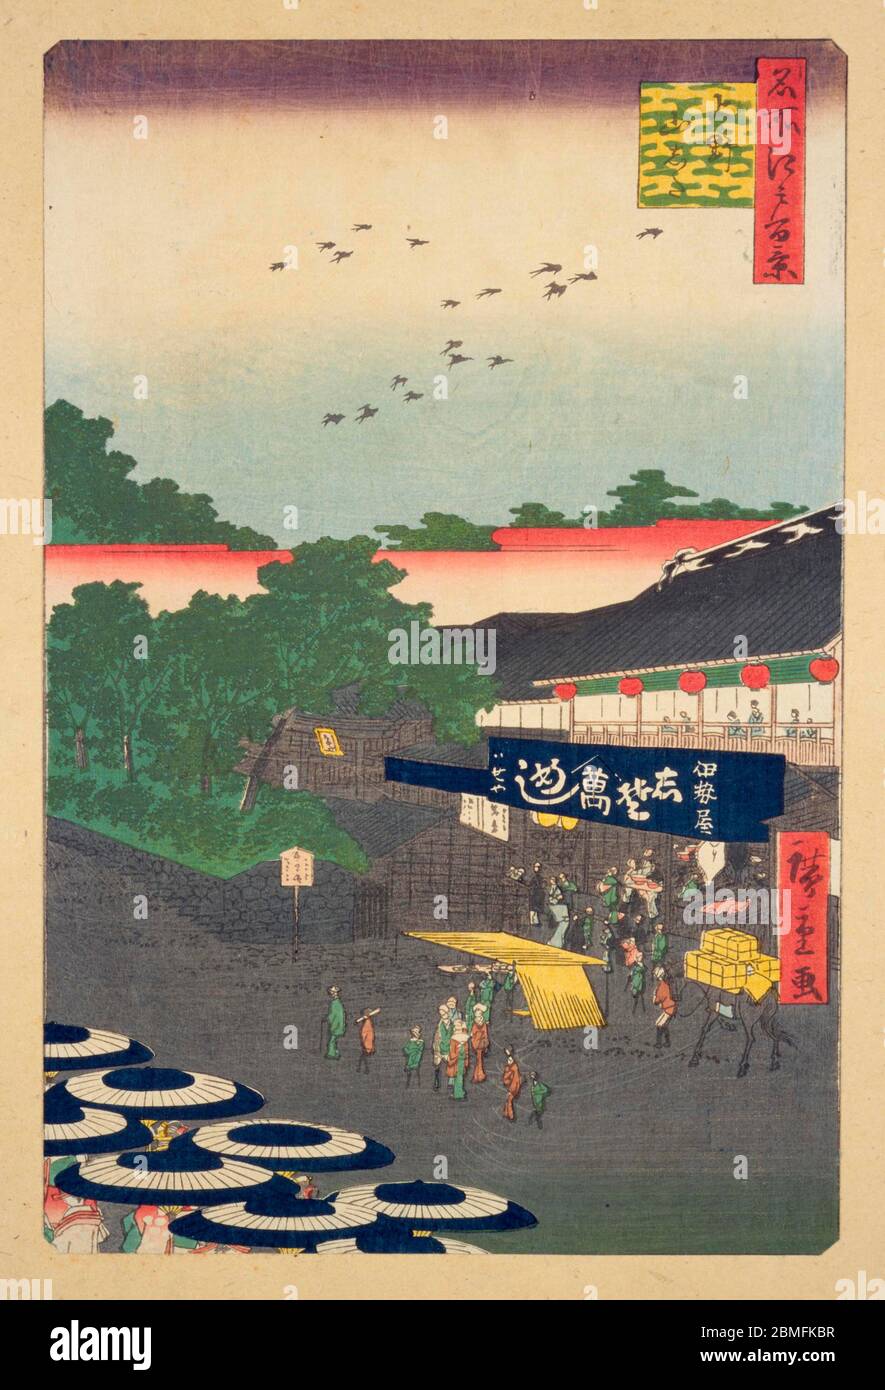 [ 1850s Japan - Japanese Restaurant ] —   Women with parasols in front of the Iseya restaurant and temples in Ueno, Edo (current Tokyo), 1858 (Ansei 5).  This woodblock print is image 12 in One Hundred Famous Views of Edo (名所江戸百景, Meisho Edo Hyakkei), a series created by ukiyoe artist Utagawa Hiroshige (歌川広重, 1797–1858).  It is one of 42 spring scenes in the series.  Title: Ueno Yamashita (上野山した)  19th century vintage Ukiyoe woodblock print. Stock Photo